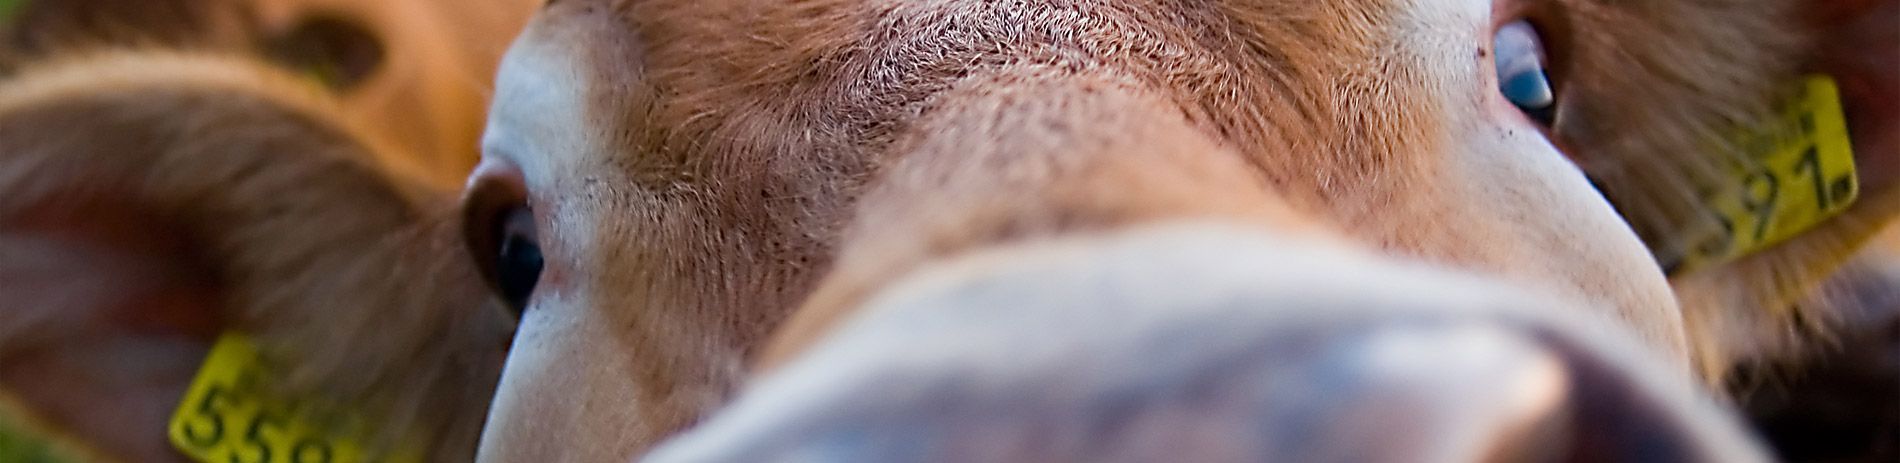 a close up of a cow 's face looking at the camera .